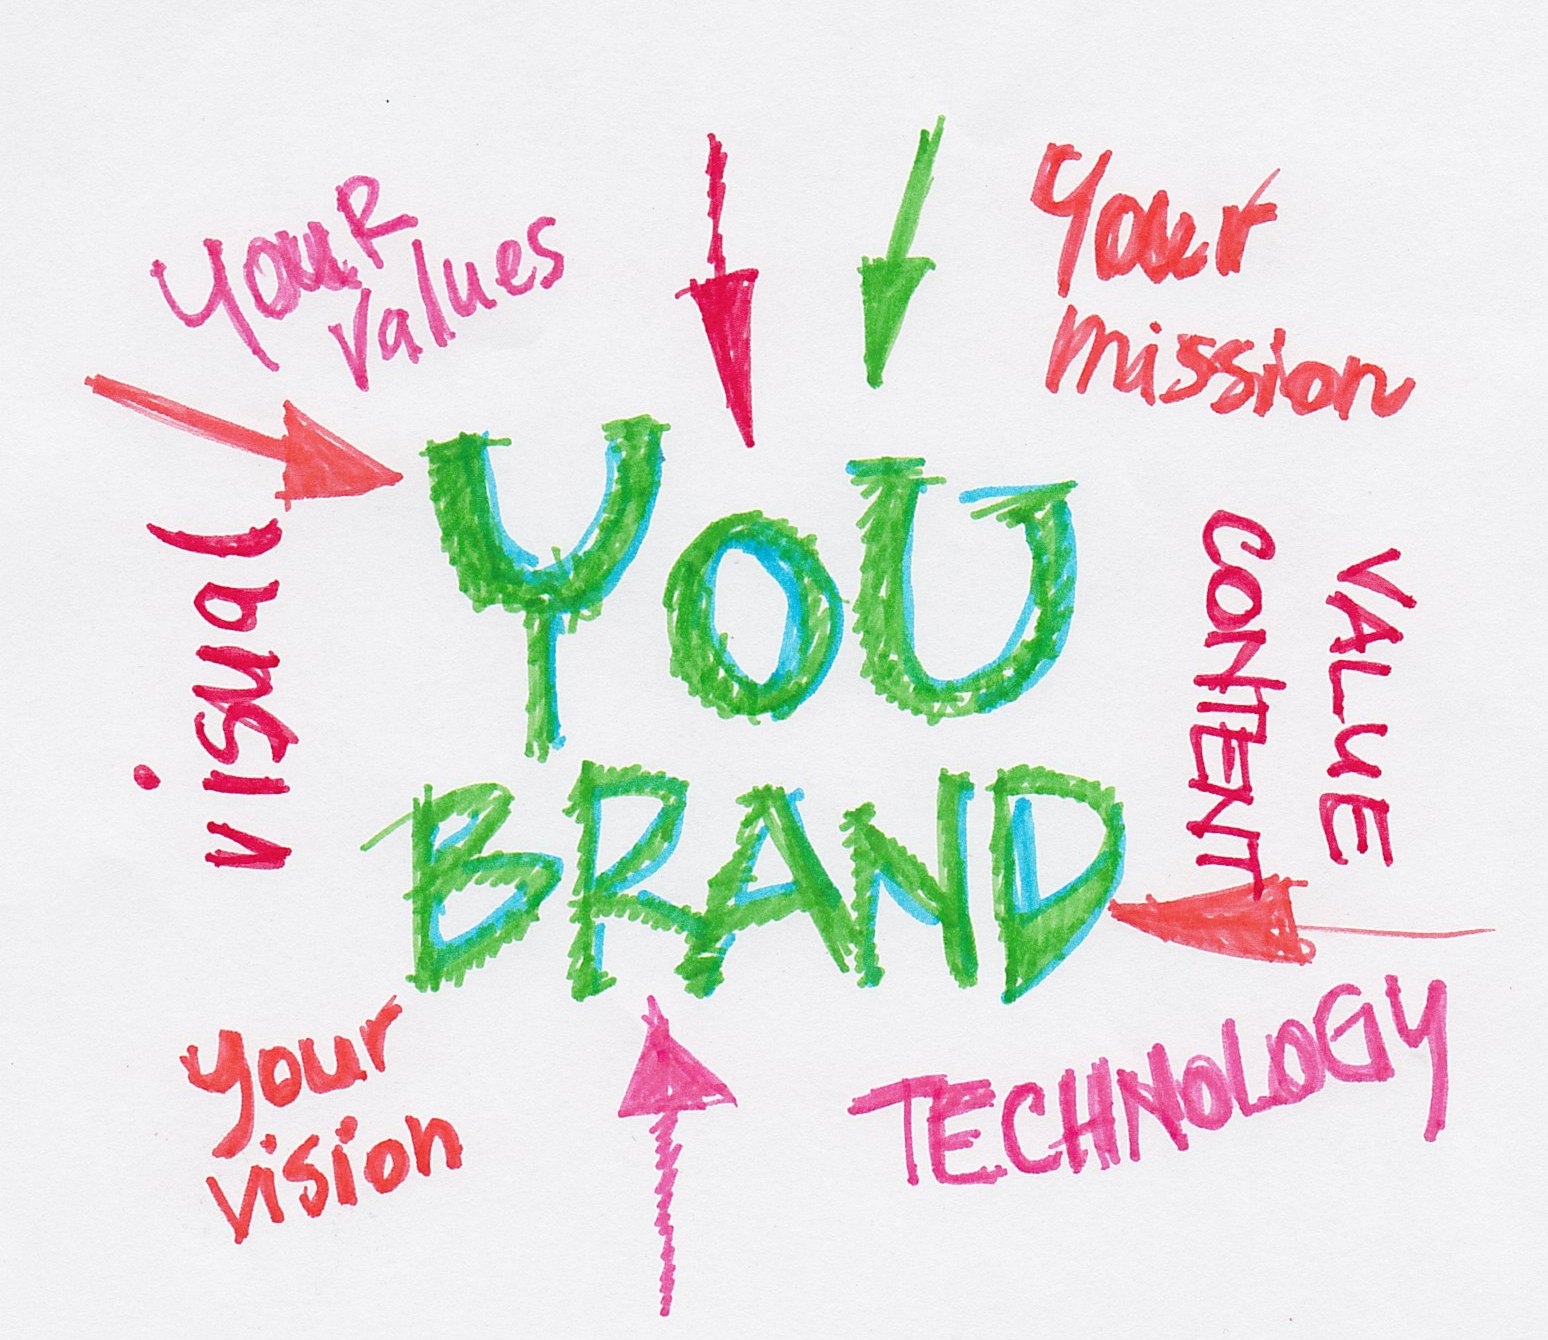 you brand values vision mission technology